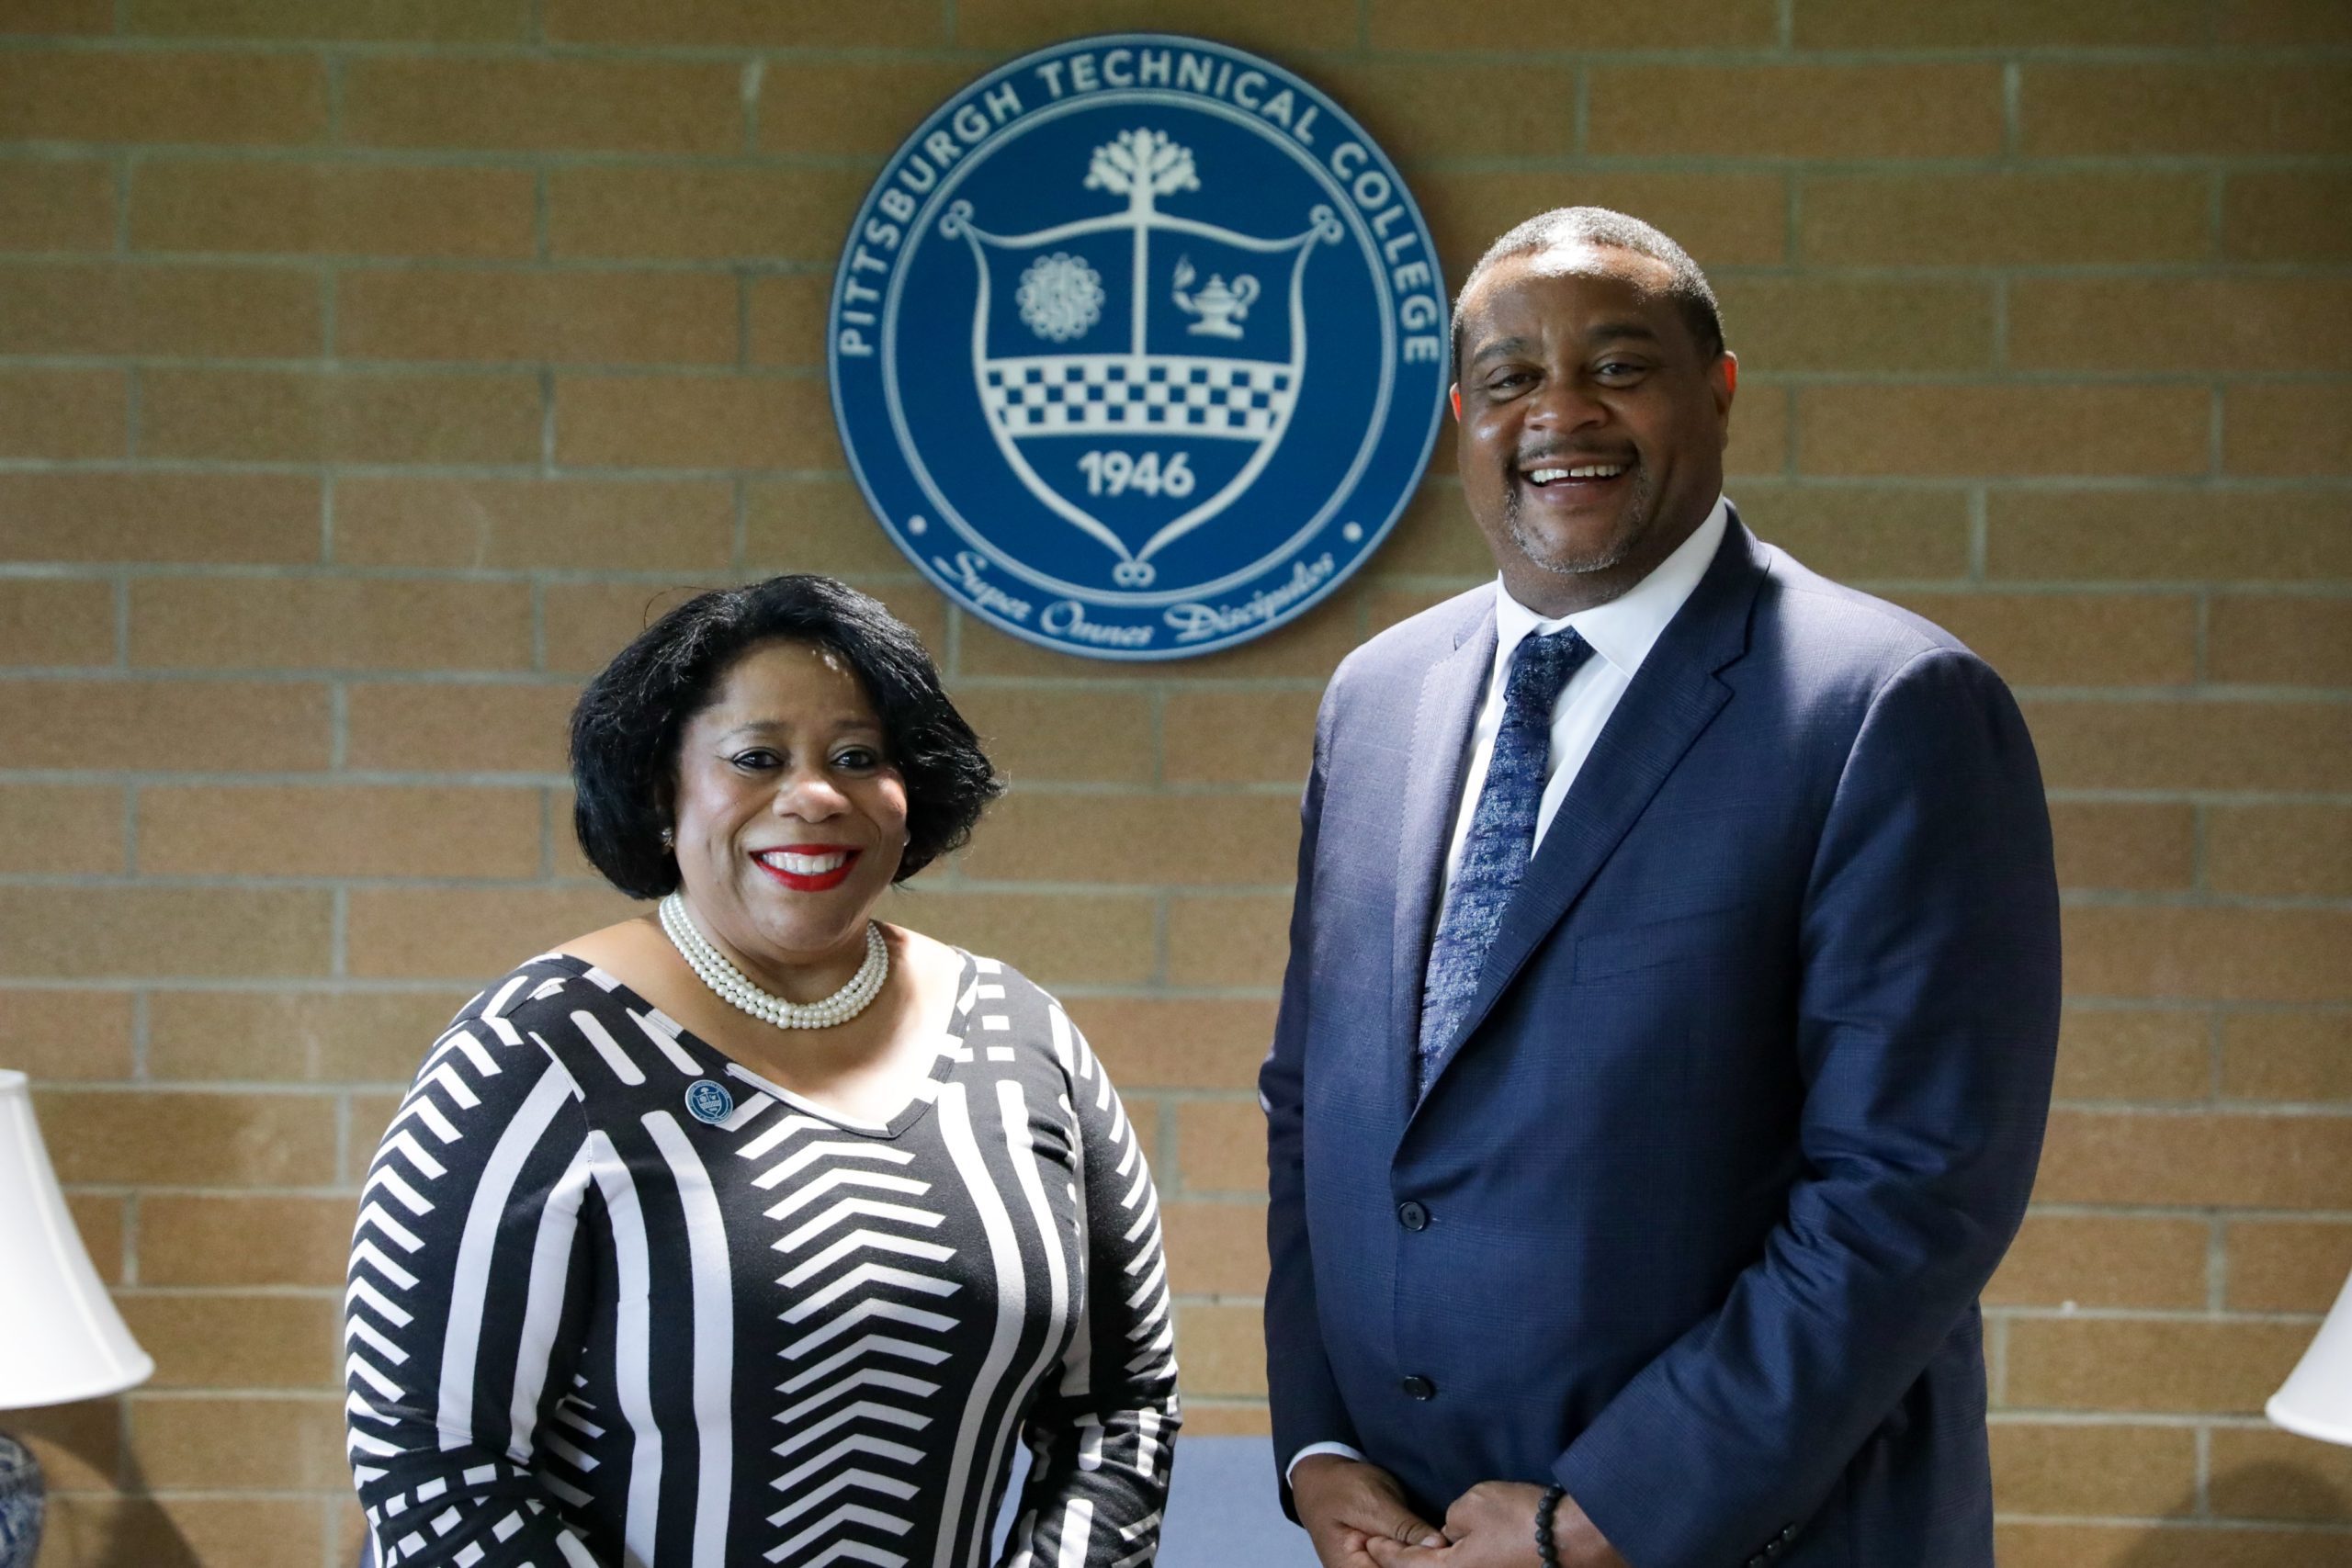 A photo of Dr. Harvey-Smith standing with Mayor of Pittsburgh Ed Gaines